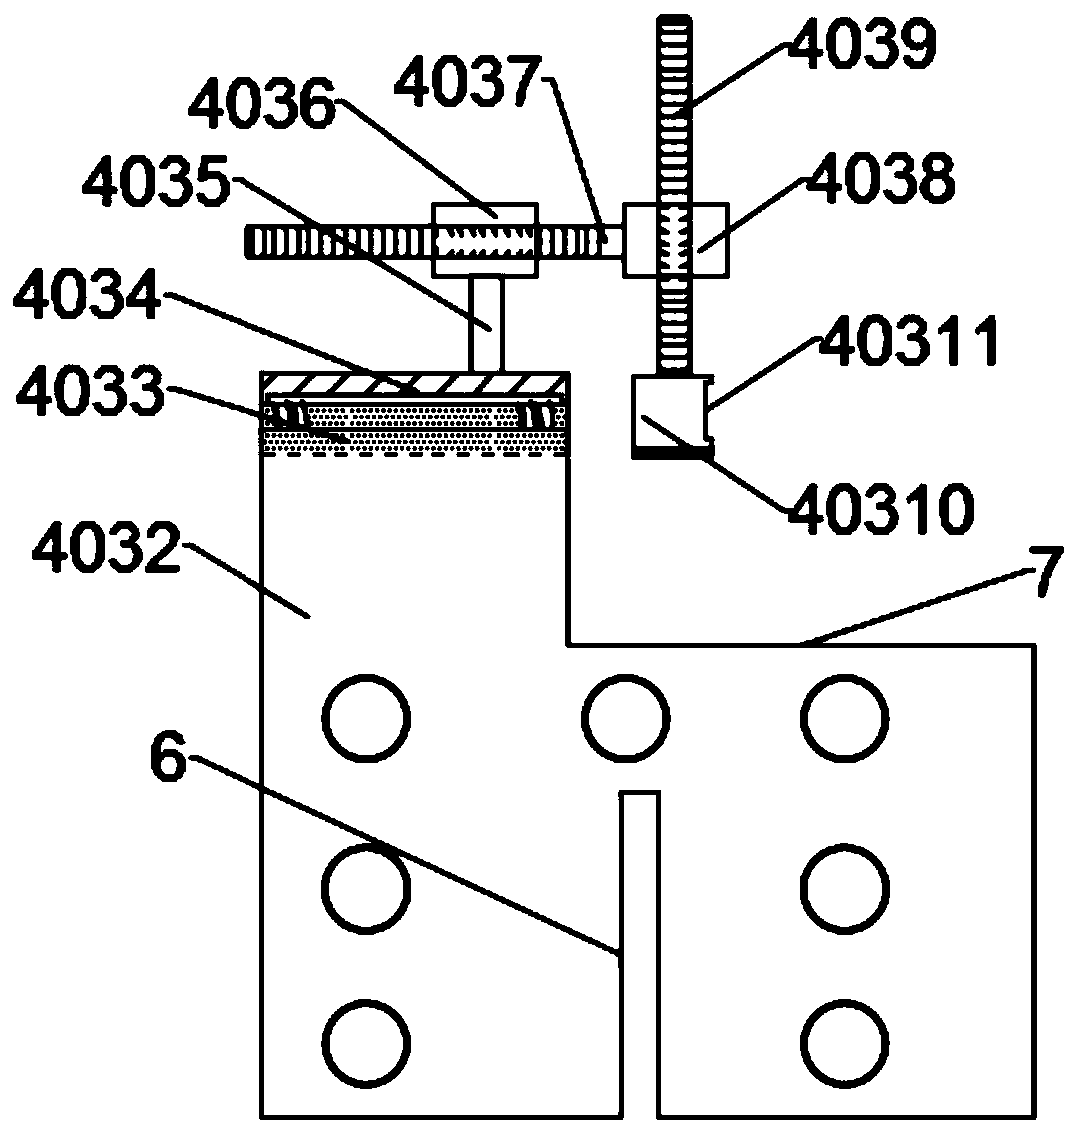 A three-dimensional positioning tool for welding assembly of automobile floor